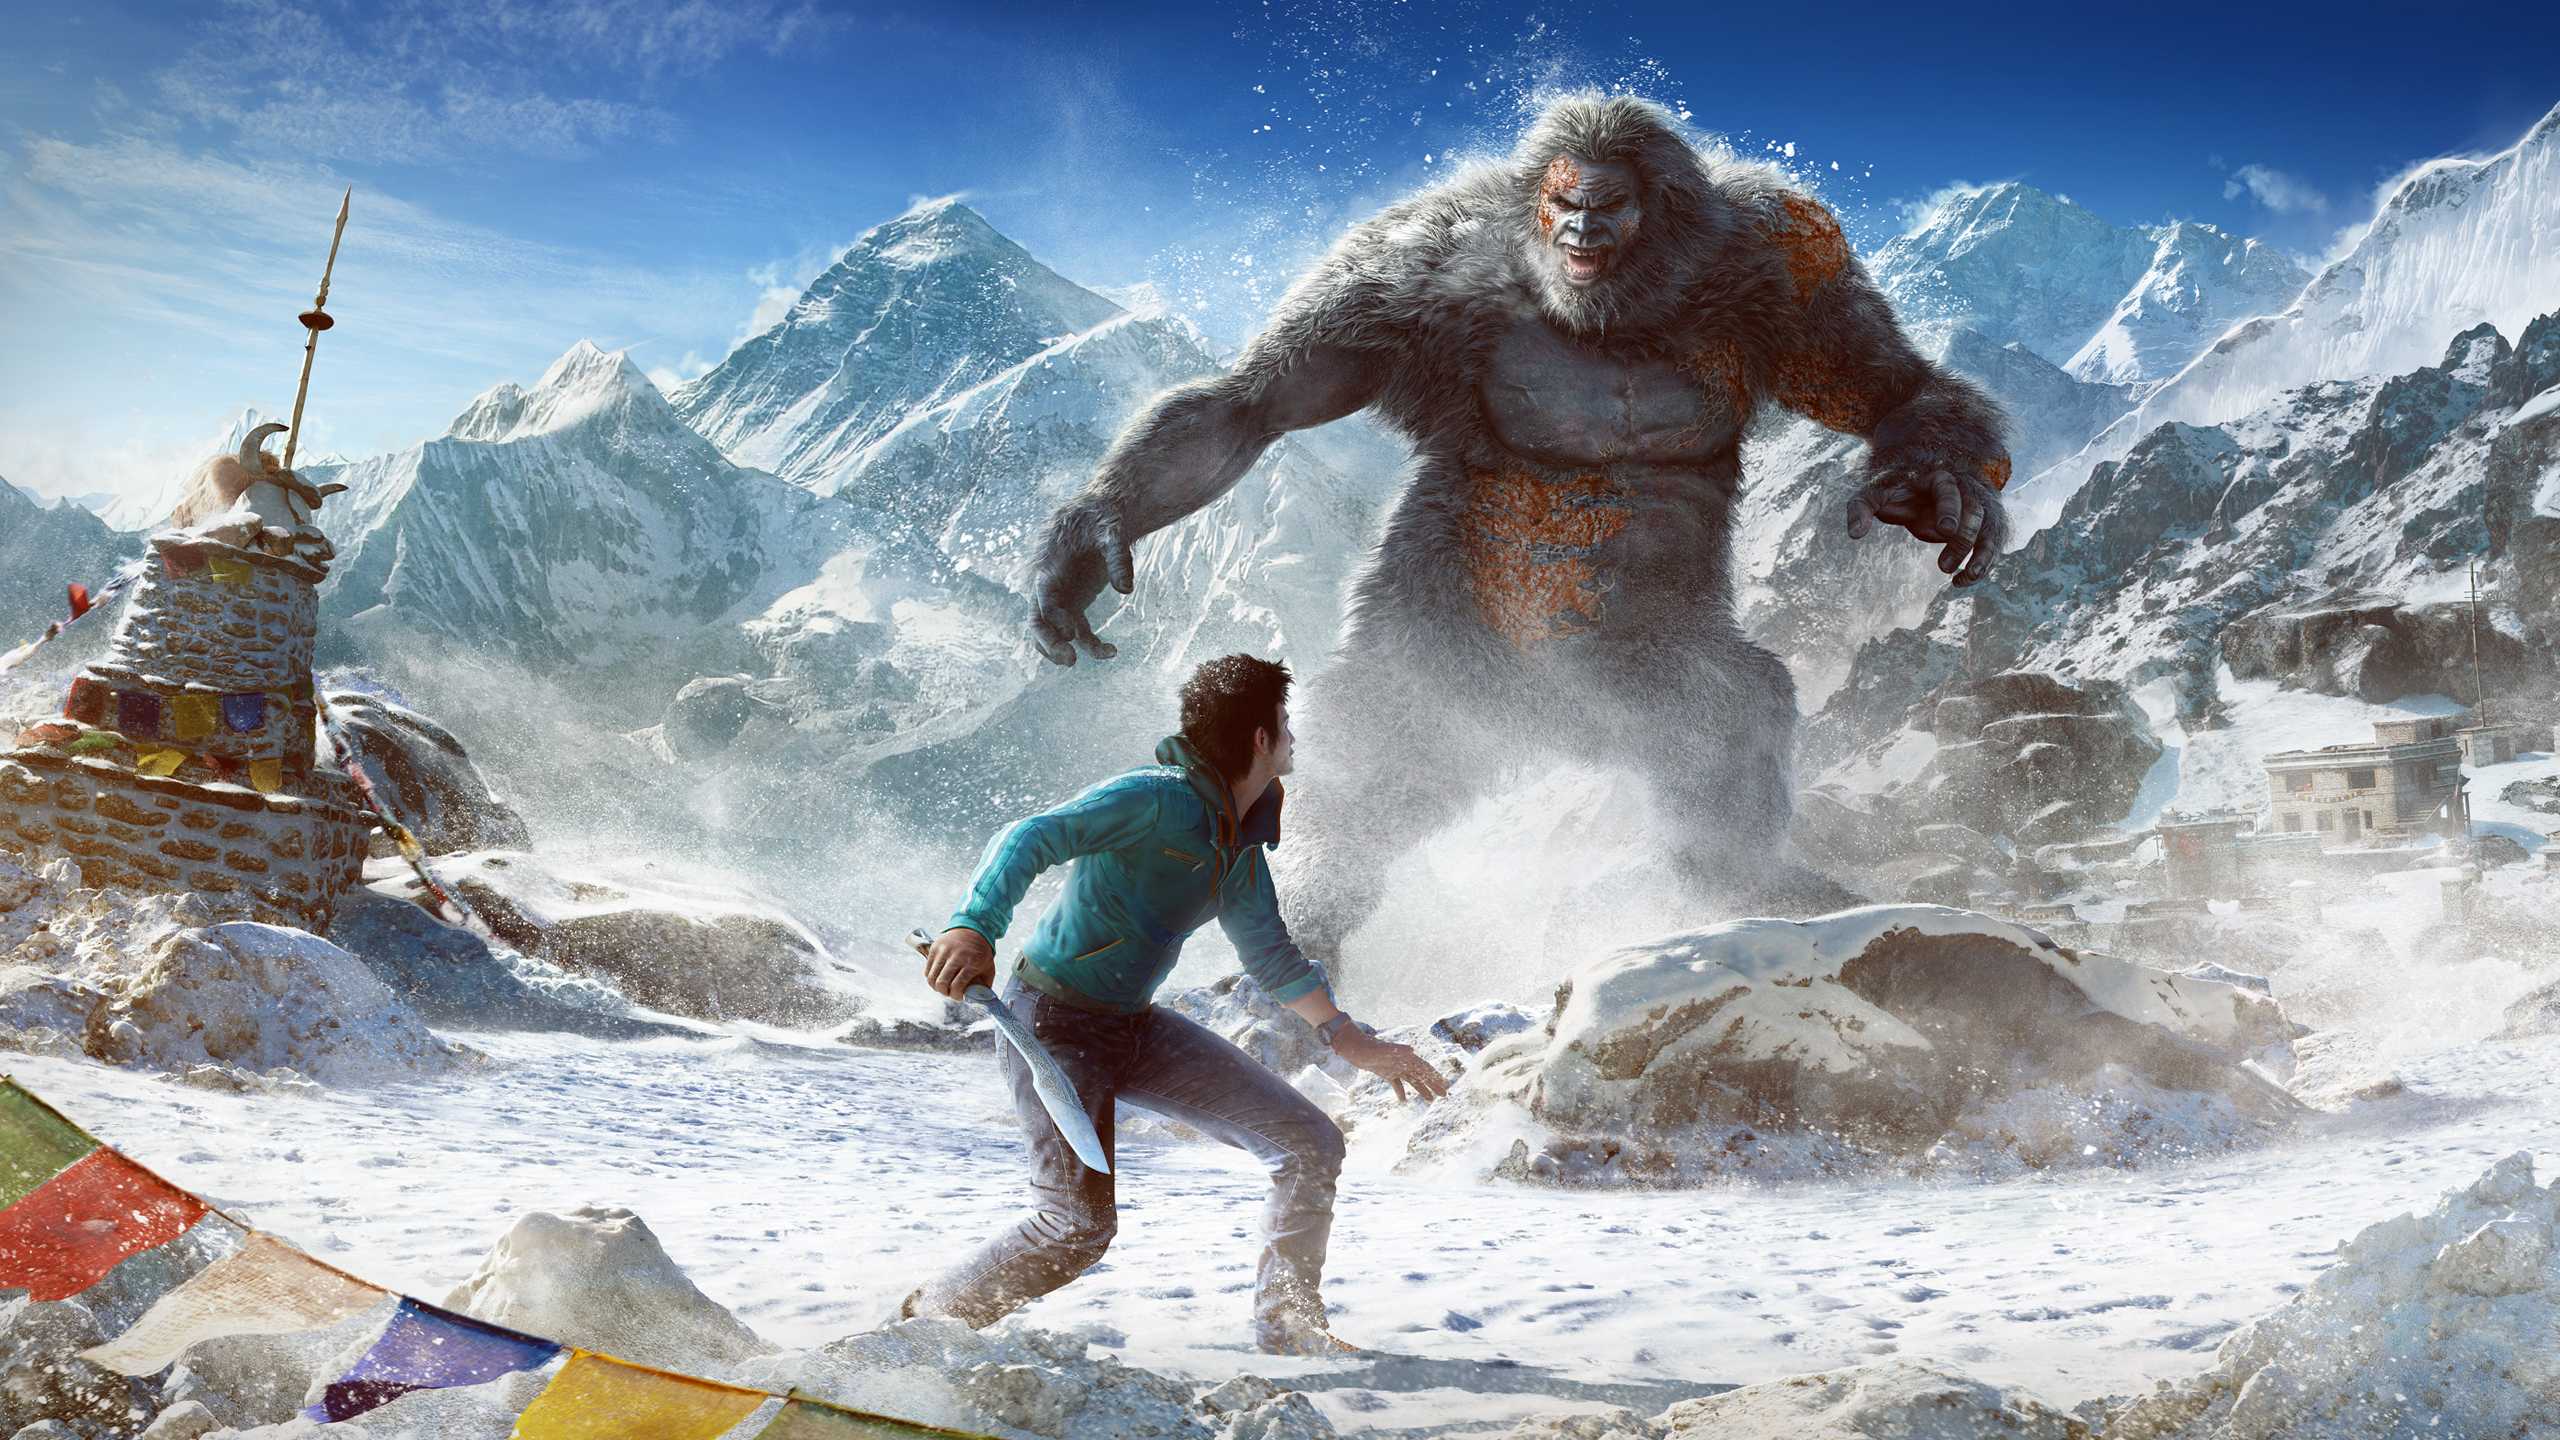 Far Cry Valley Of The Yetis Wallpaper HD